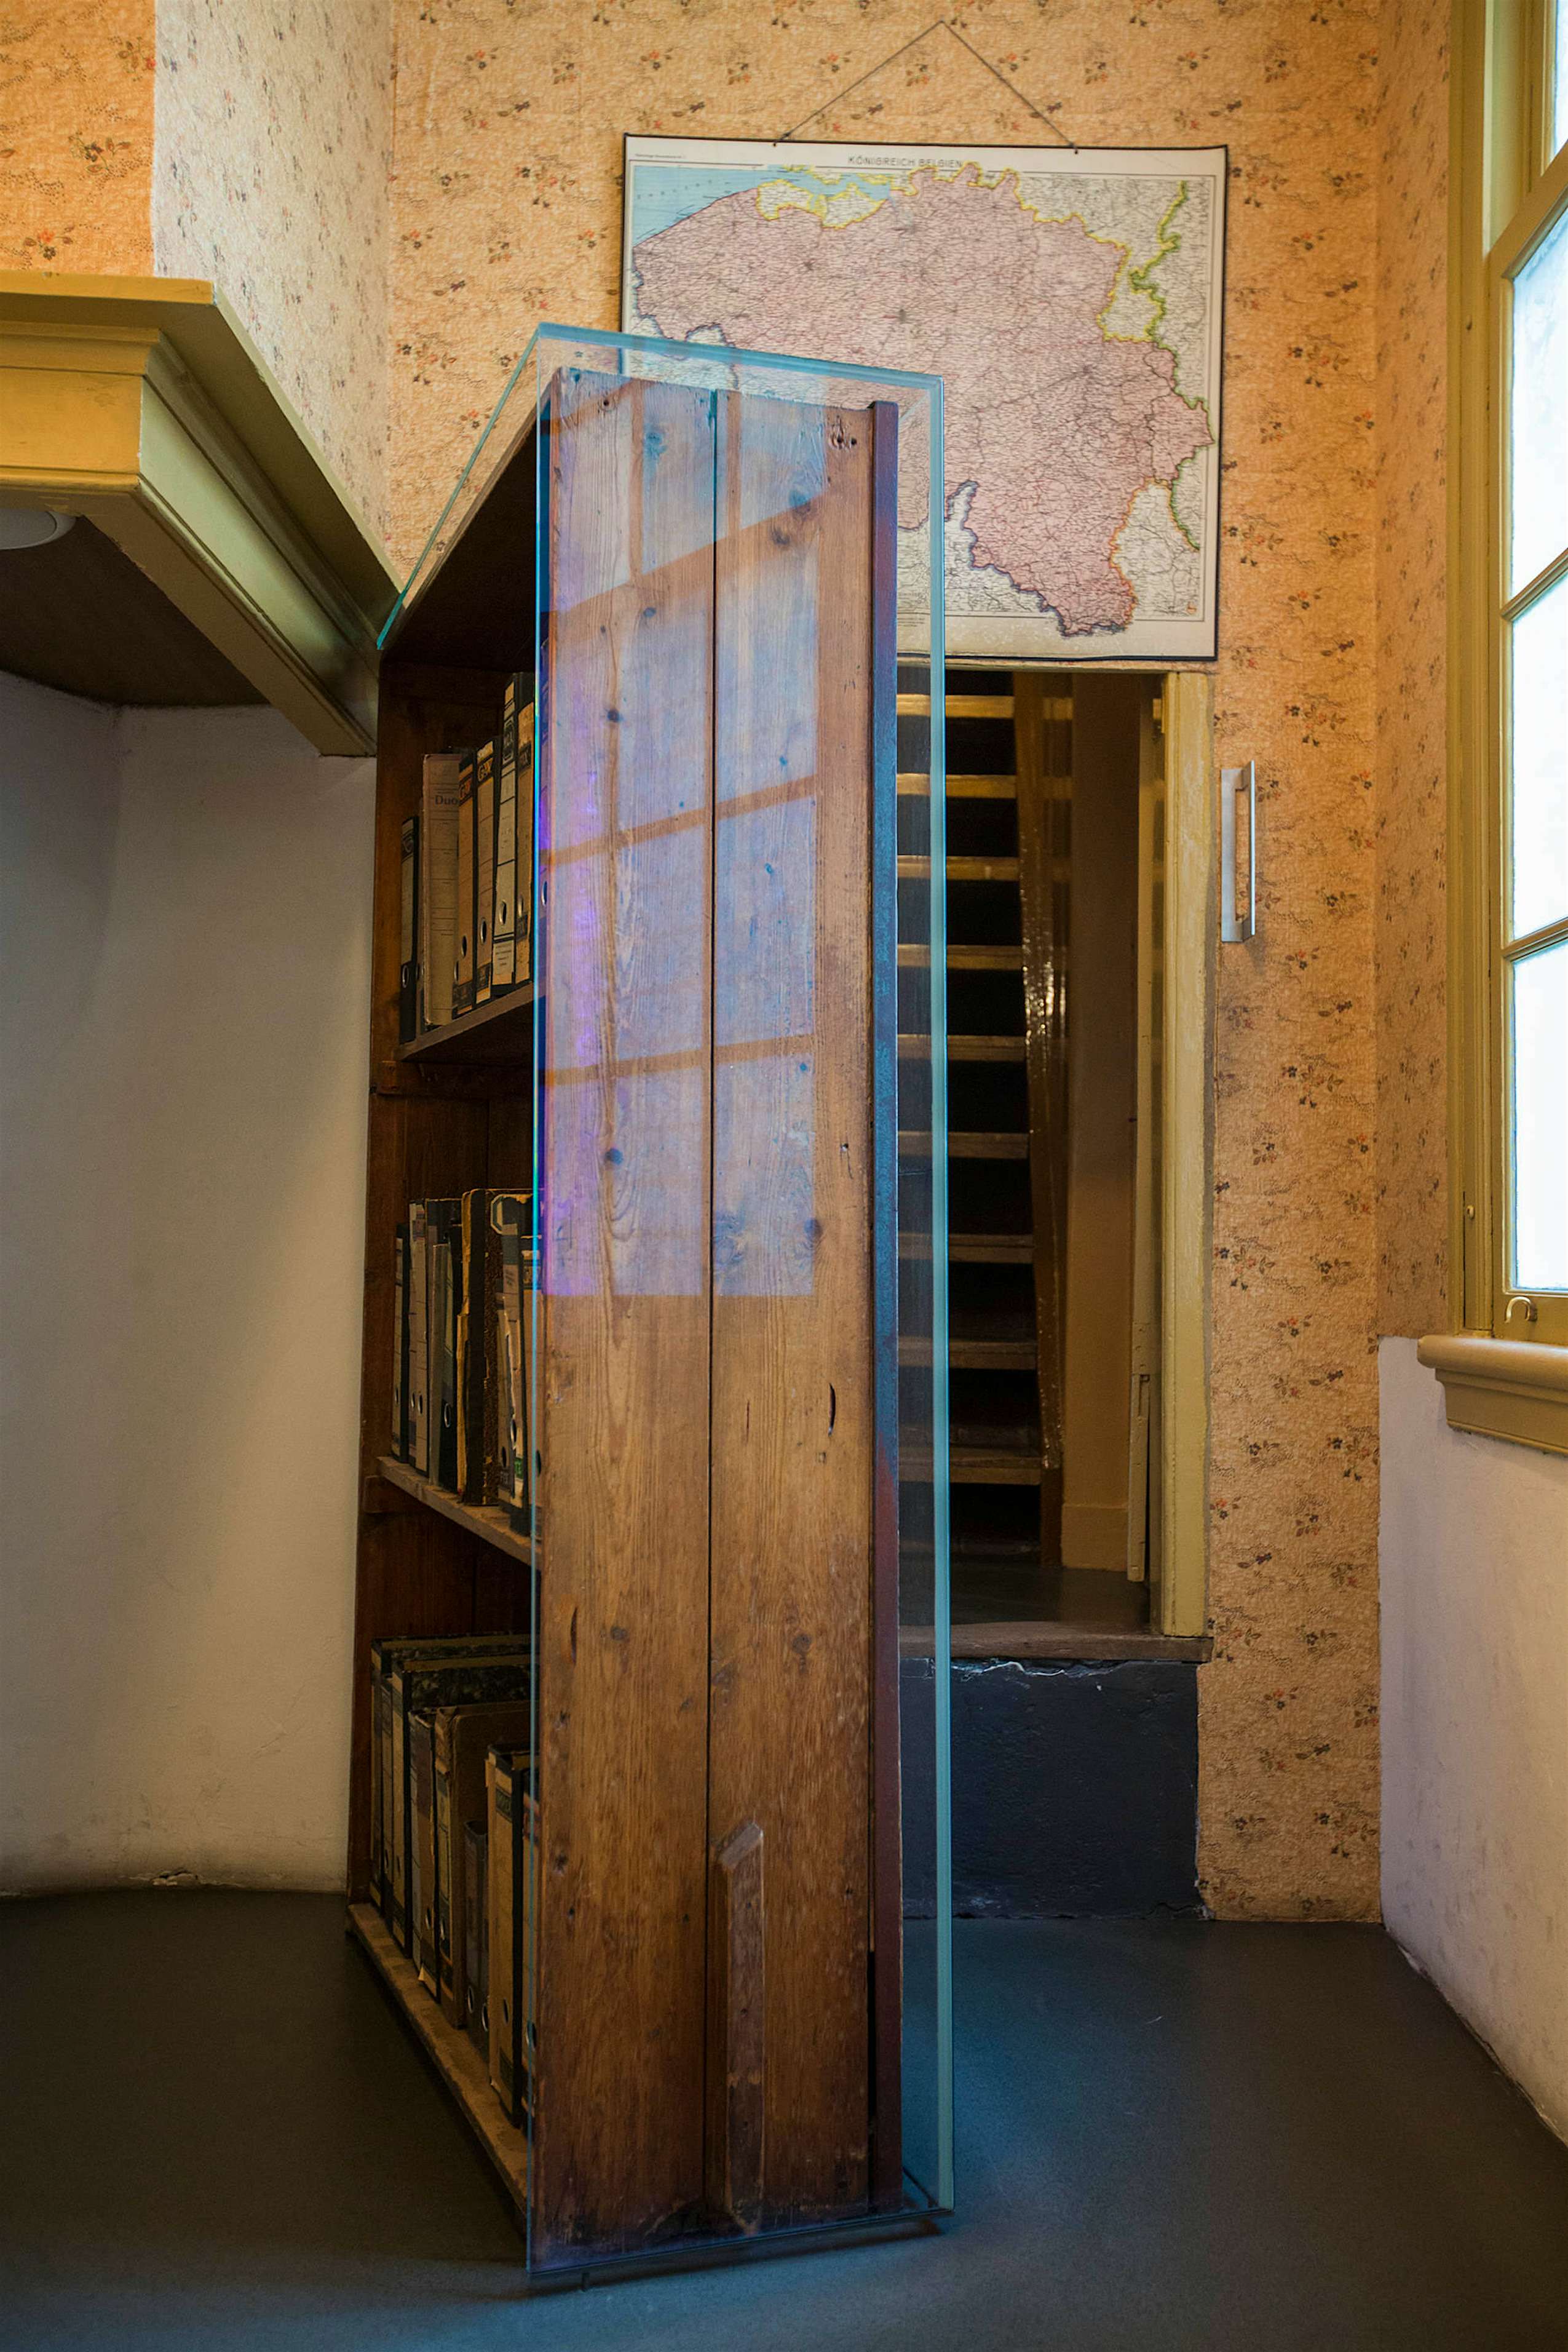 The renewed Anne Frank House wants to bring history to a new generation